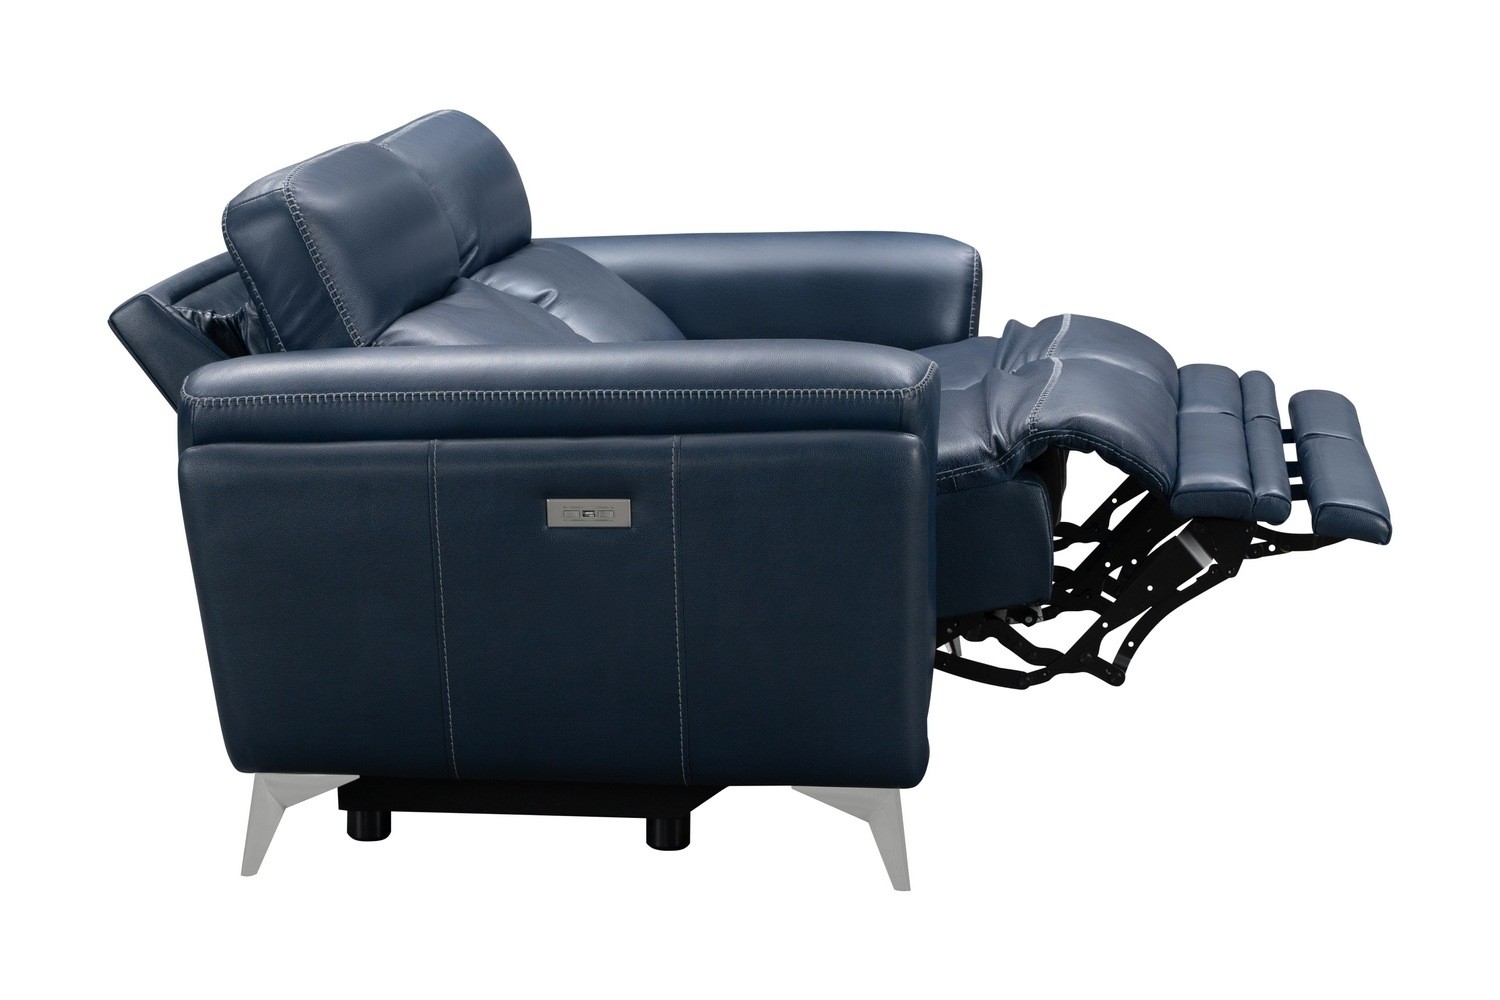 Barcalounger Cameron Power Reclining Loveseat with Power Head Rests - Marco Navy Blue/Leather Match